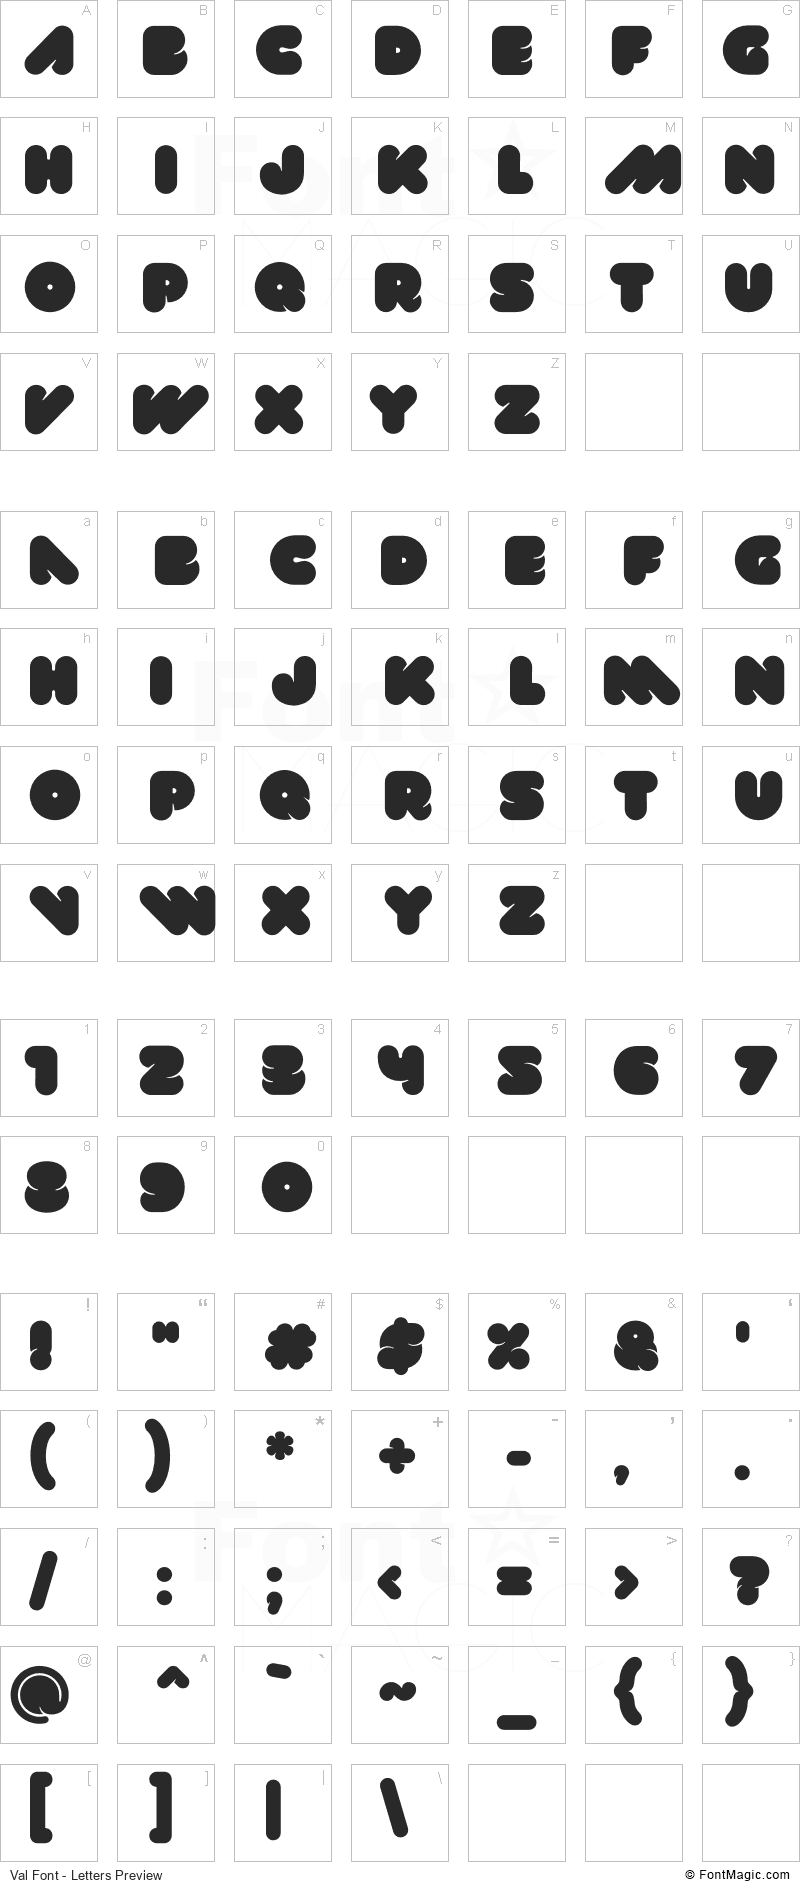 Val Font - All Latters Preview Chart